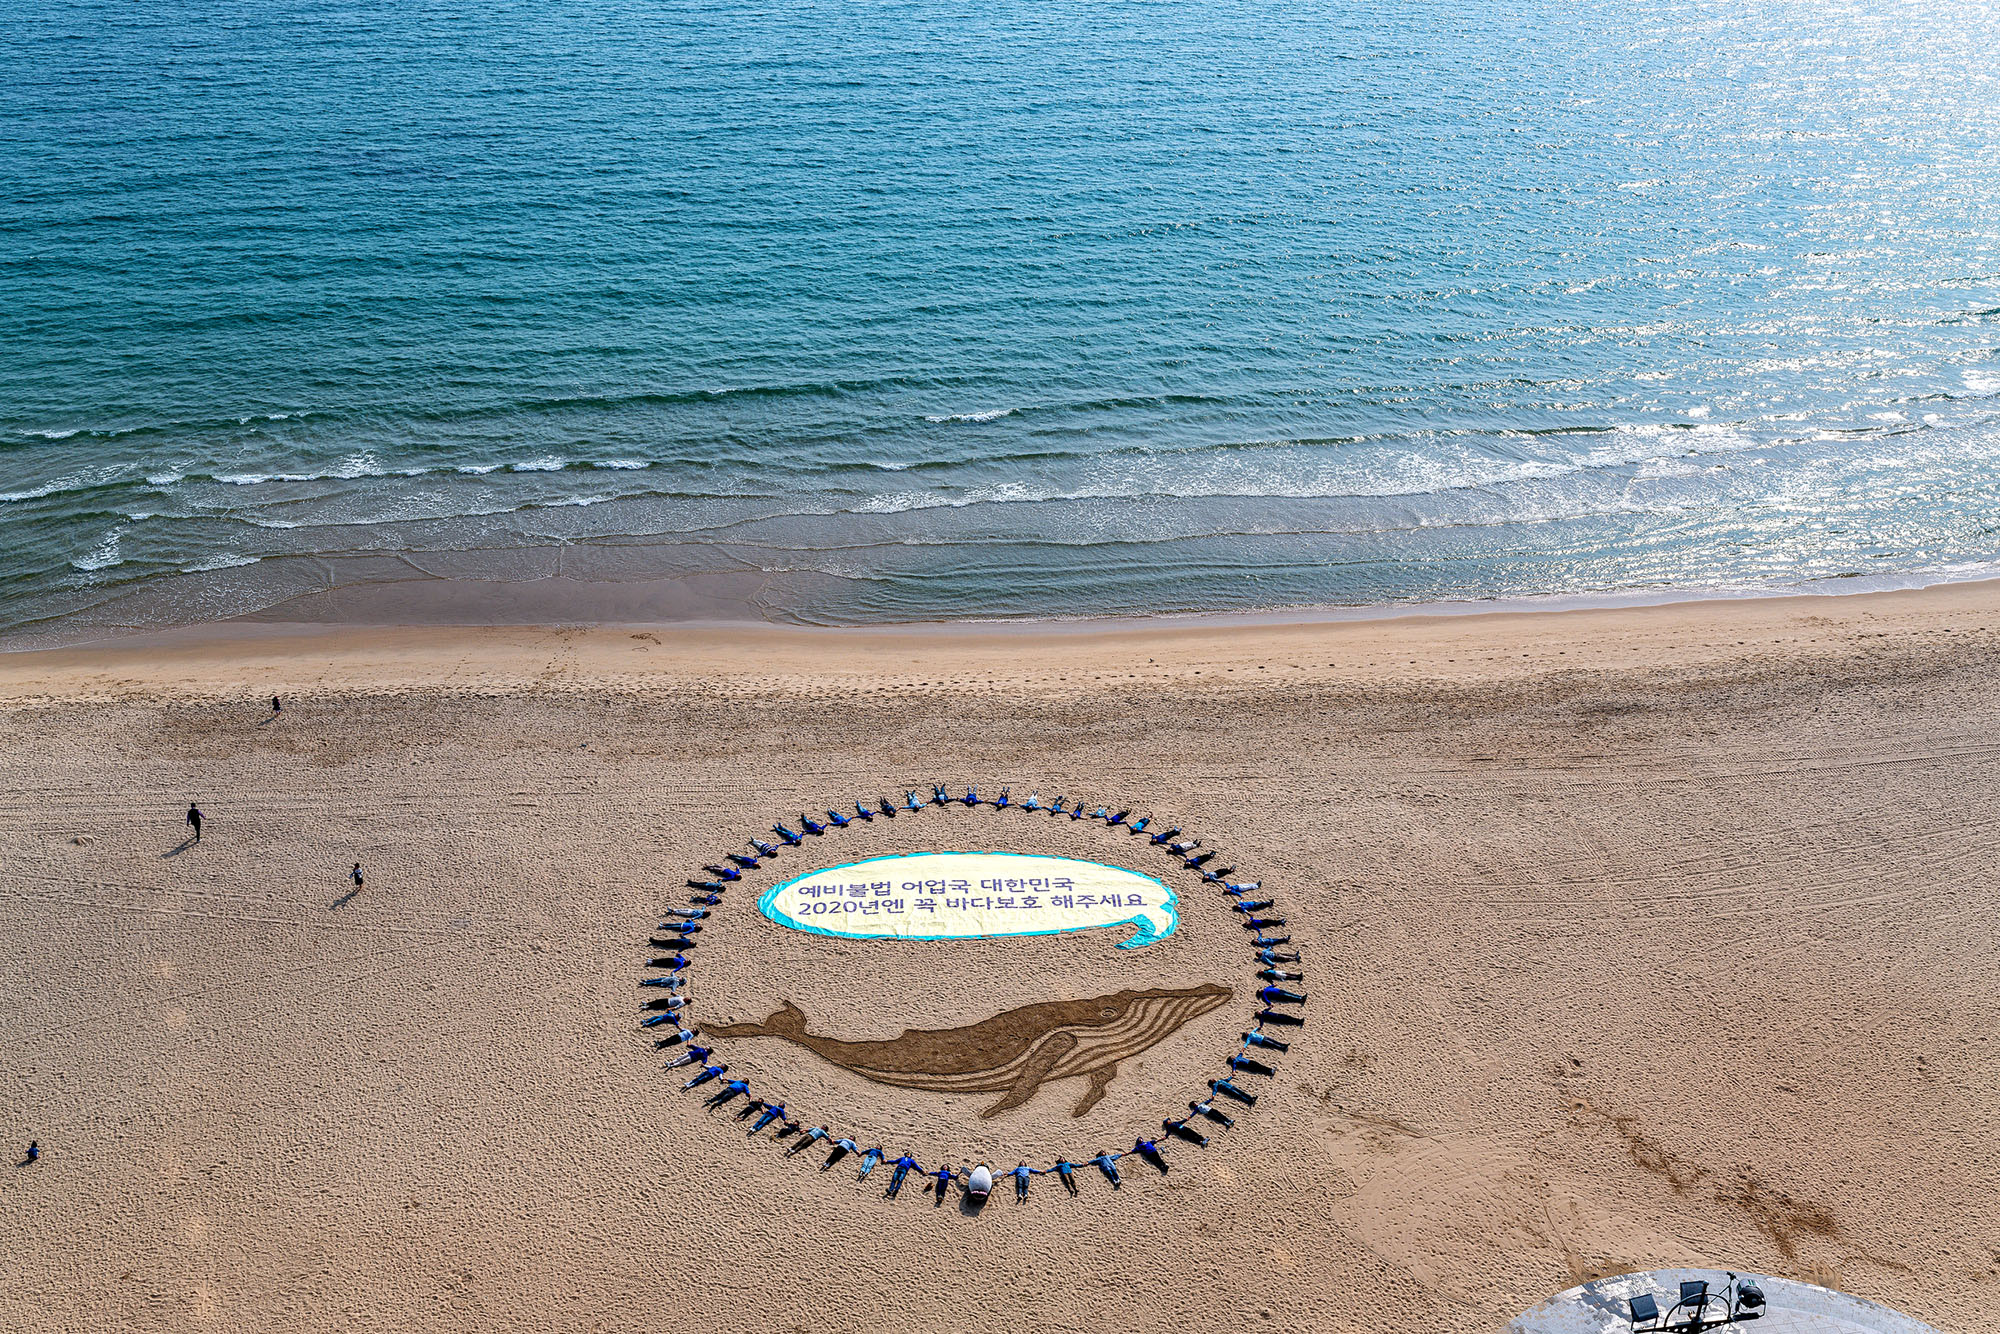 Aerial view of a whale drawn in the sand of a beach. People wearing blue lie in a circle around it, and a speech bubble-shaped banner coming from the whale shows Korean text.